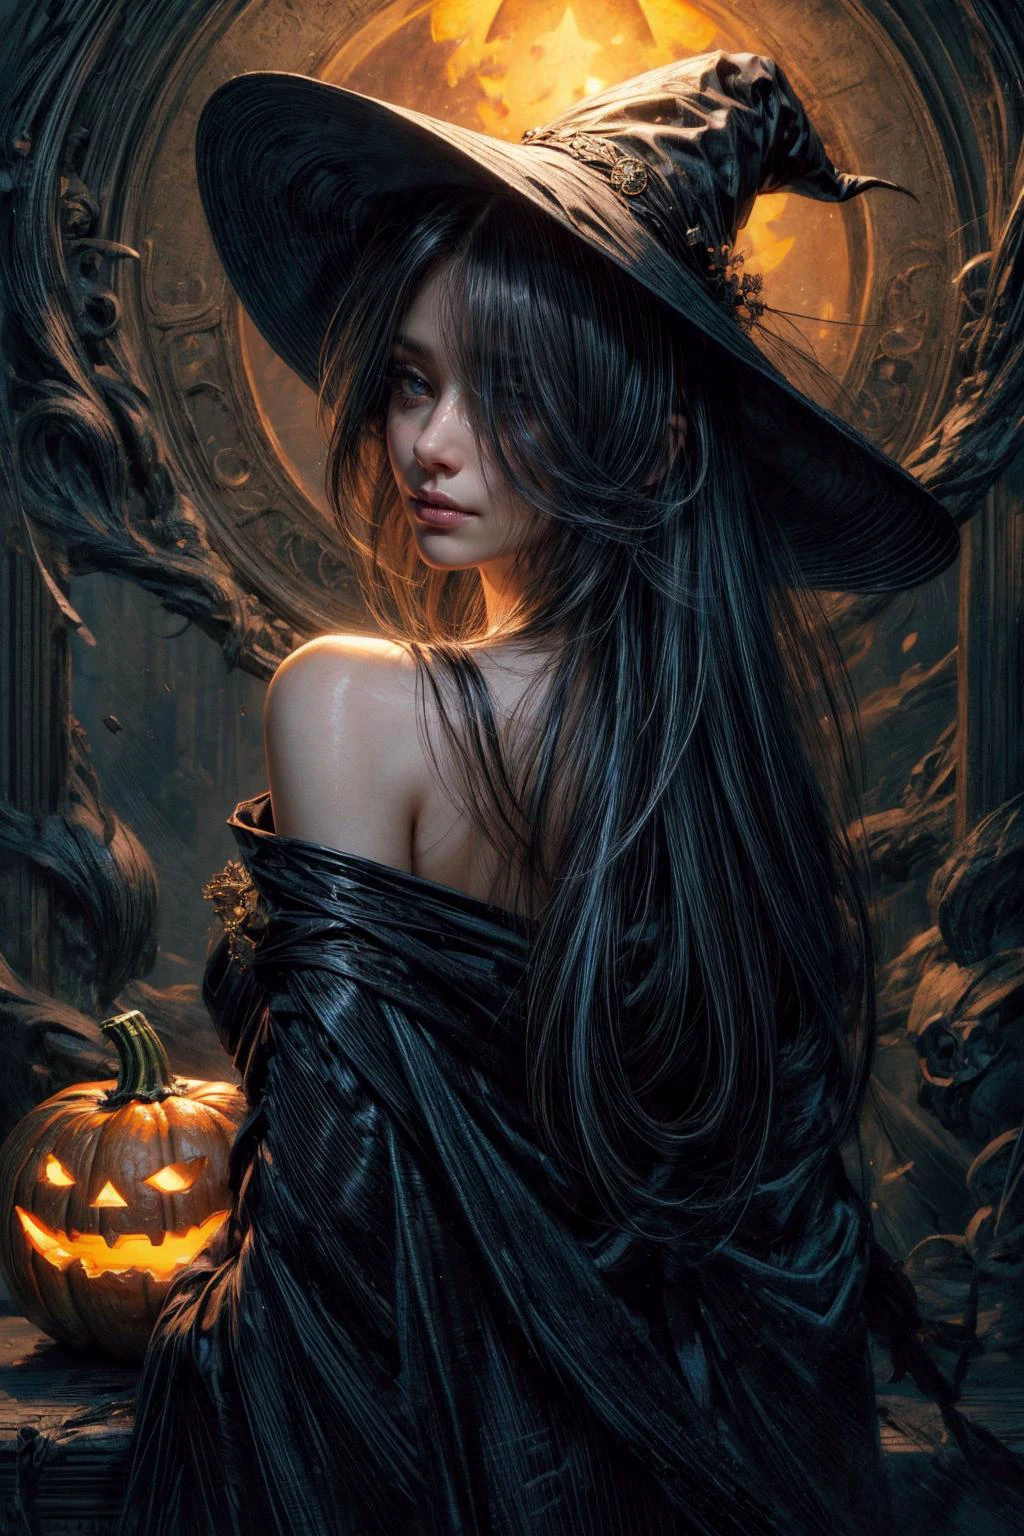 Create a mesmerizing masterpiece inspired by [bichu] and [Greg Rutkowski], reminiscent of the style of (Simon Bisley). This detailed and intricate oil on canvas, dry brush illustration showcases a young witch in a haunting Halloween setting.
In the heart of a moonlit night, a quaint witch's hut stands amidst a sprawling pumpkin field. The field is ripe with vibrant, orange pumpkins, their round forms glinting in the pale moonlight. A welcoming jack-o'-lantern sits at the doorstep of the hut, casting a warm, flickering glow, while a friendly scarecrow stands guard in the midst of the pumpkins.
The young witch herself is a captivating presence. She wears a dark, tattered robe with exposed shoulders and a tall, pointy hat, adding an air of mystique to the eerie night. Her delicate features are softly illuminated by the jack-o'-lantern's light, lending an enchanting quality to her appearance.
She stands tall with [delicate small breasts] and a [delicate slim  figure], her face bearing a [sad:1.2] expression that hints at ancient secrets. [Flushed cheeks] and a defined jawline frame her [beautiful] [perfect] [highly detailed] features, while [full cheeks] display intricate [detailed contours] and [cute dimples]. Her face is adorned with [face highlighter] and [dark makeup], featuring [delicately proportioned features], including a [long defined chin], [high cheekbones], and a [nose with a slight upturn at the tip] set atop a [narrow nose bridge]. Her [downturned:1.4] [soft lips] exude a [sad] expression and are graced with [natural light pink lipstick]. Her [detailed upturned inquisitive eyes] boast a piercing [hypnotizing gaze], with irises of [light blue], framed by [thin small hard angled eyebrows]. They are further enhanced with [black winged eyeliner], long eyelashes, and [black eyeshadow]. Her pale, glossy skin boasts [visible skin pores], radiating with [moisture] and [health].
Completing her mesmerizing look, her straight, sleek, raven-black hair features subtle [blue highlights], cascading around her like the tendrils of a haunting melody.  